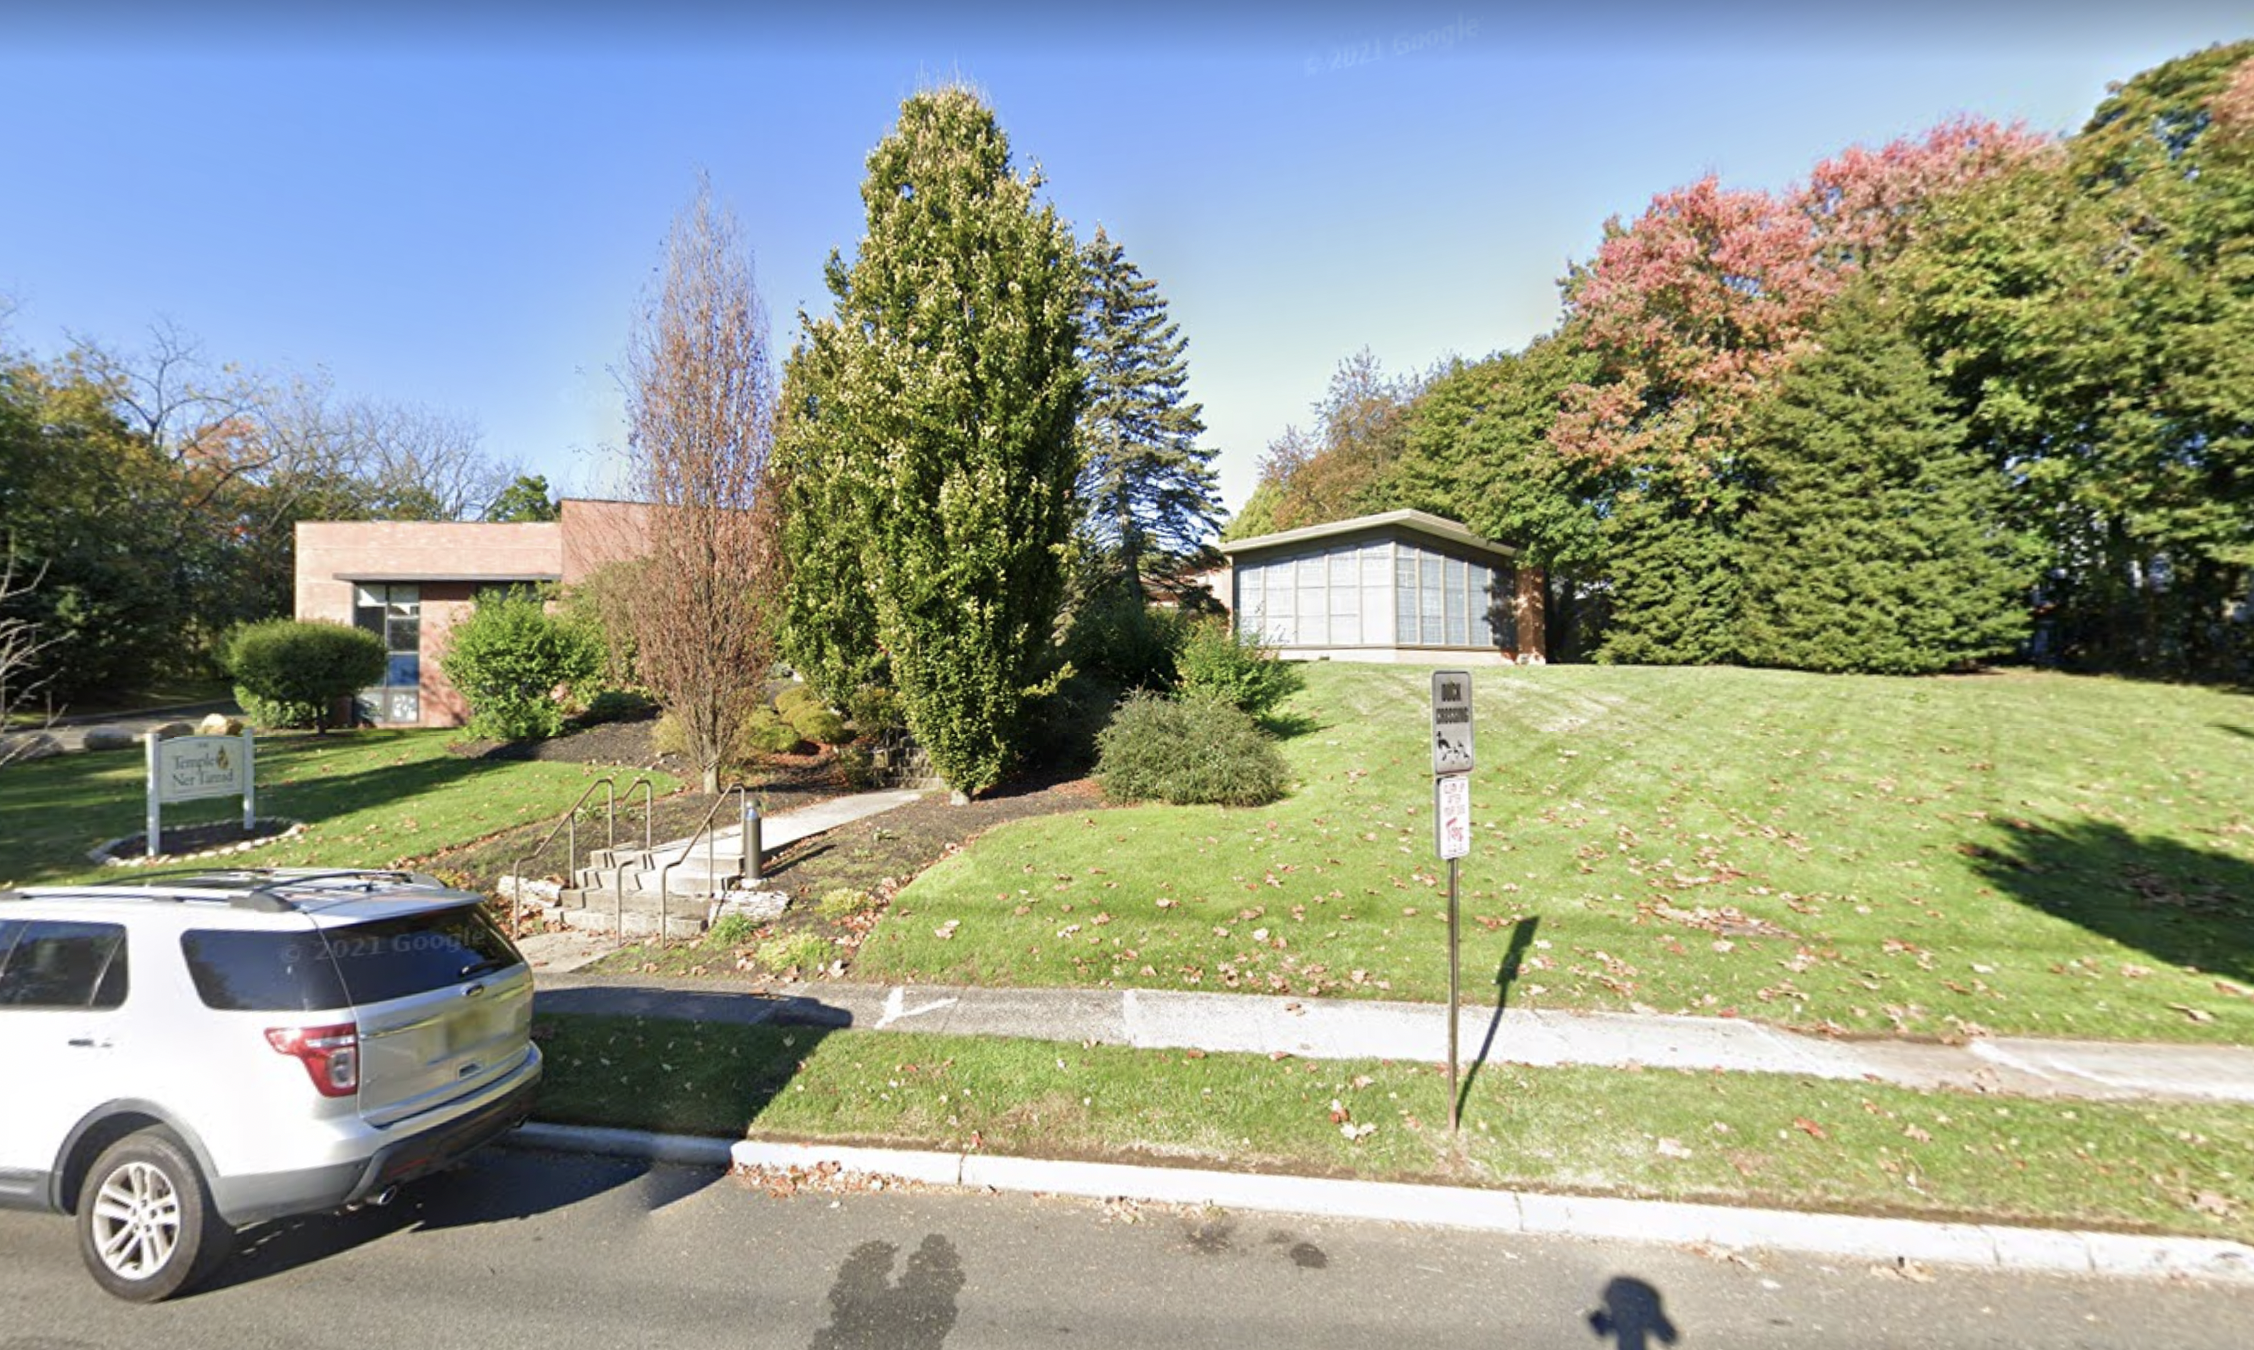 Temple Ner Tamid in Bloomfield, New Jersey, was targeted by a masked man who threw a Molotov cocktail at its door on Jan. 29, 2023. (Google Maps)